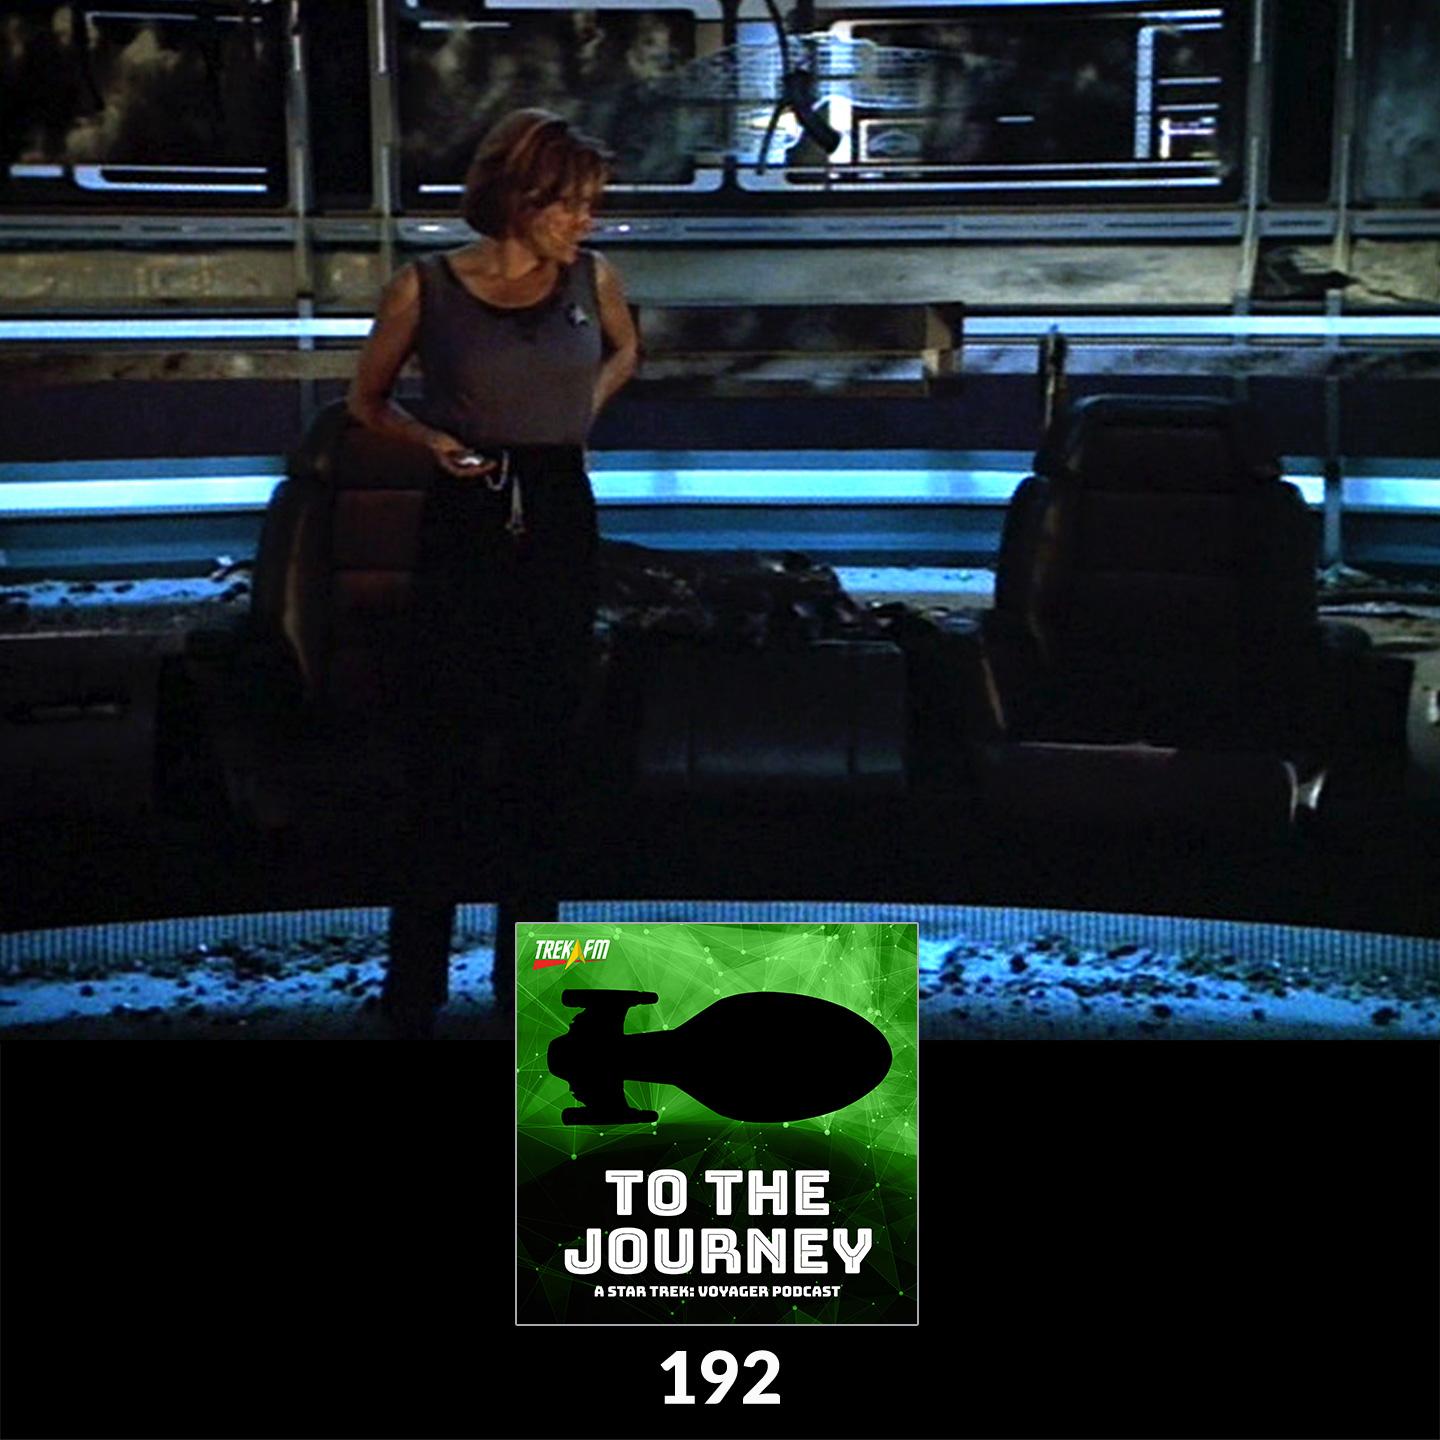 To The Journey 192: But It Never Really Happened - Voyager Continuity.